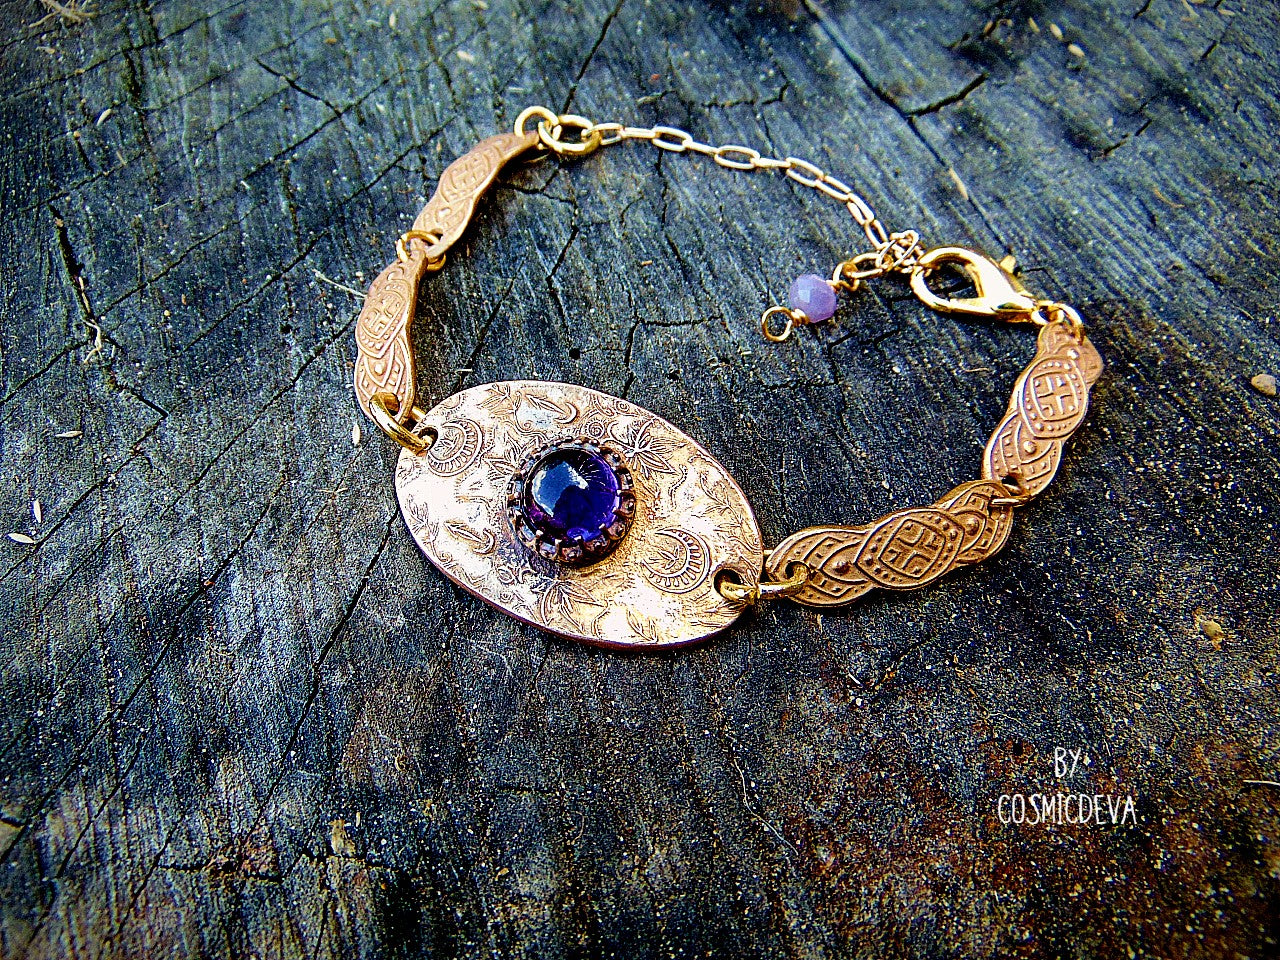 This one-of-a-kind piece is formed with love and care, reflecting a unique filigree design reminiscent of elven artistry. The artisan bracelet is adorned with natural amethyst, a gemstone known for its stunning purple hue and calming properties. The hand-formed chain links are meticulously designed with a medieval texture, adding an element of historical charm to the piece